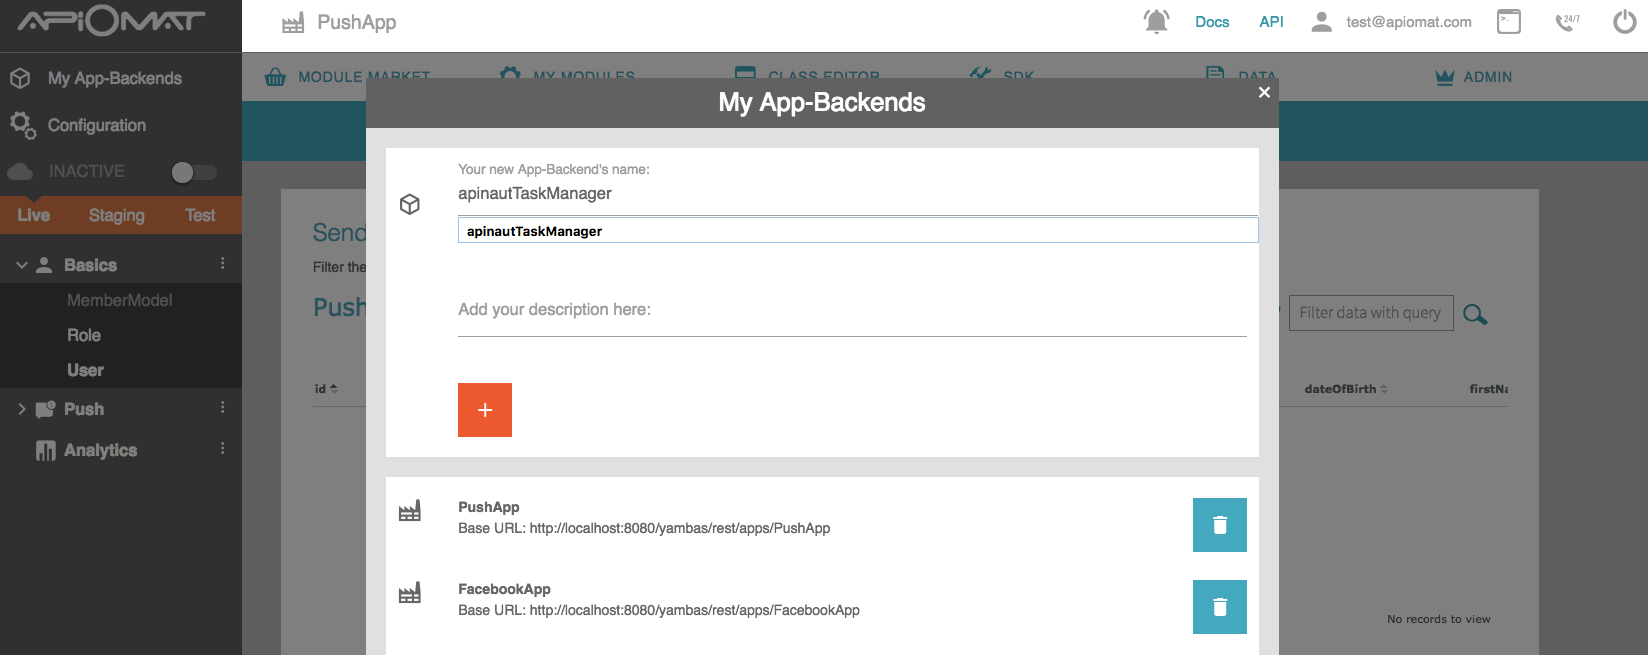 images/download/attachments/10719146/taskManager_newBackend.png